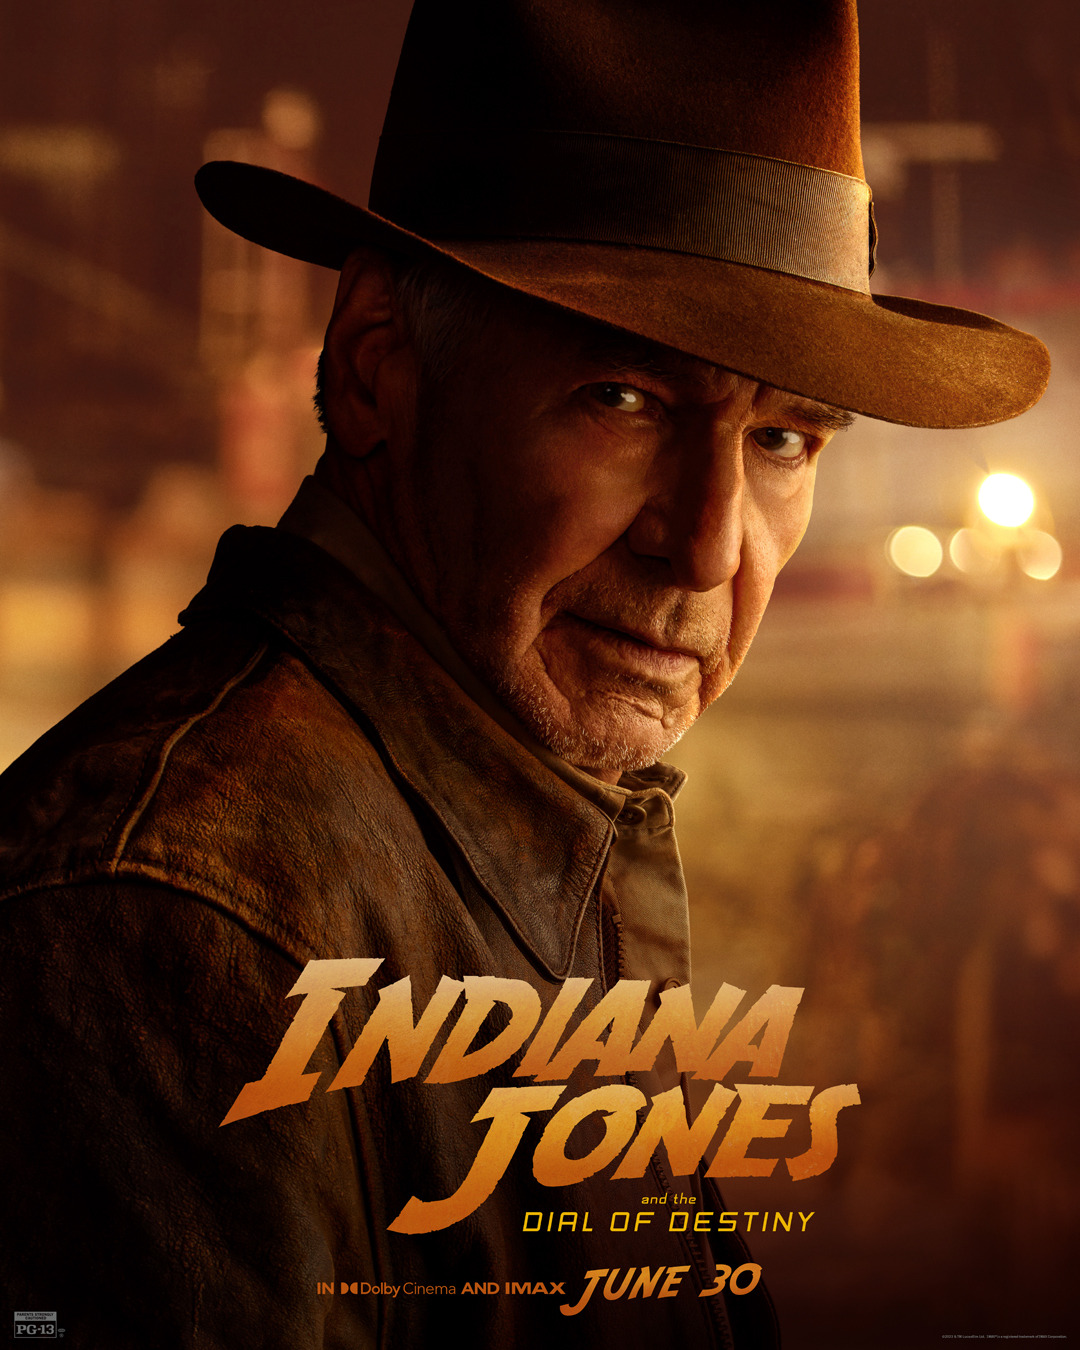 Harrison Ford thanks Tom Selleck for not being Indiana Jones ...